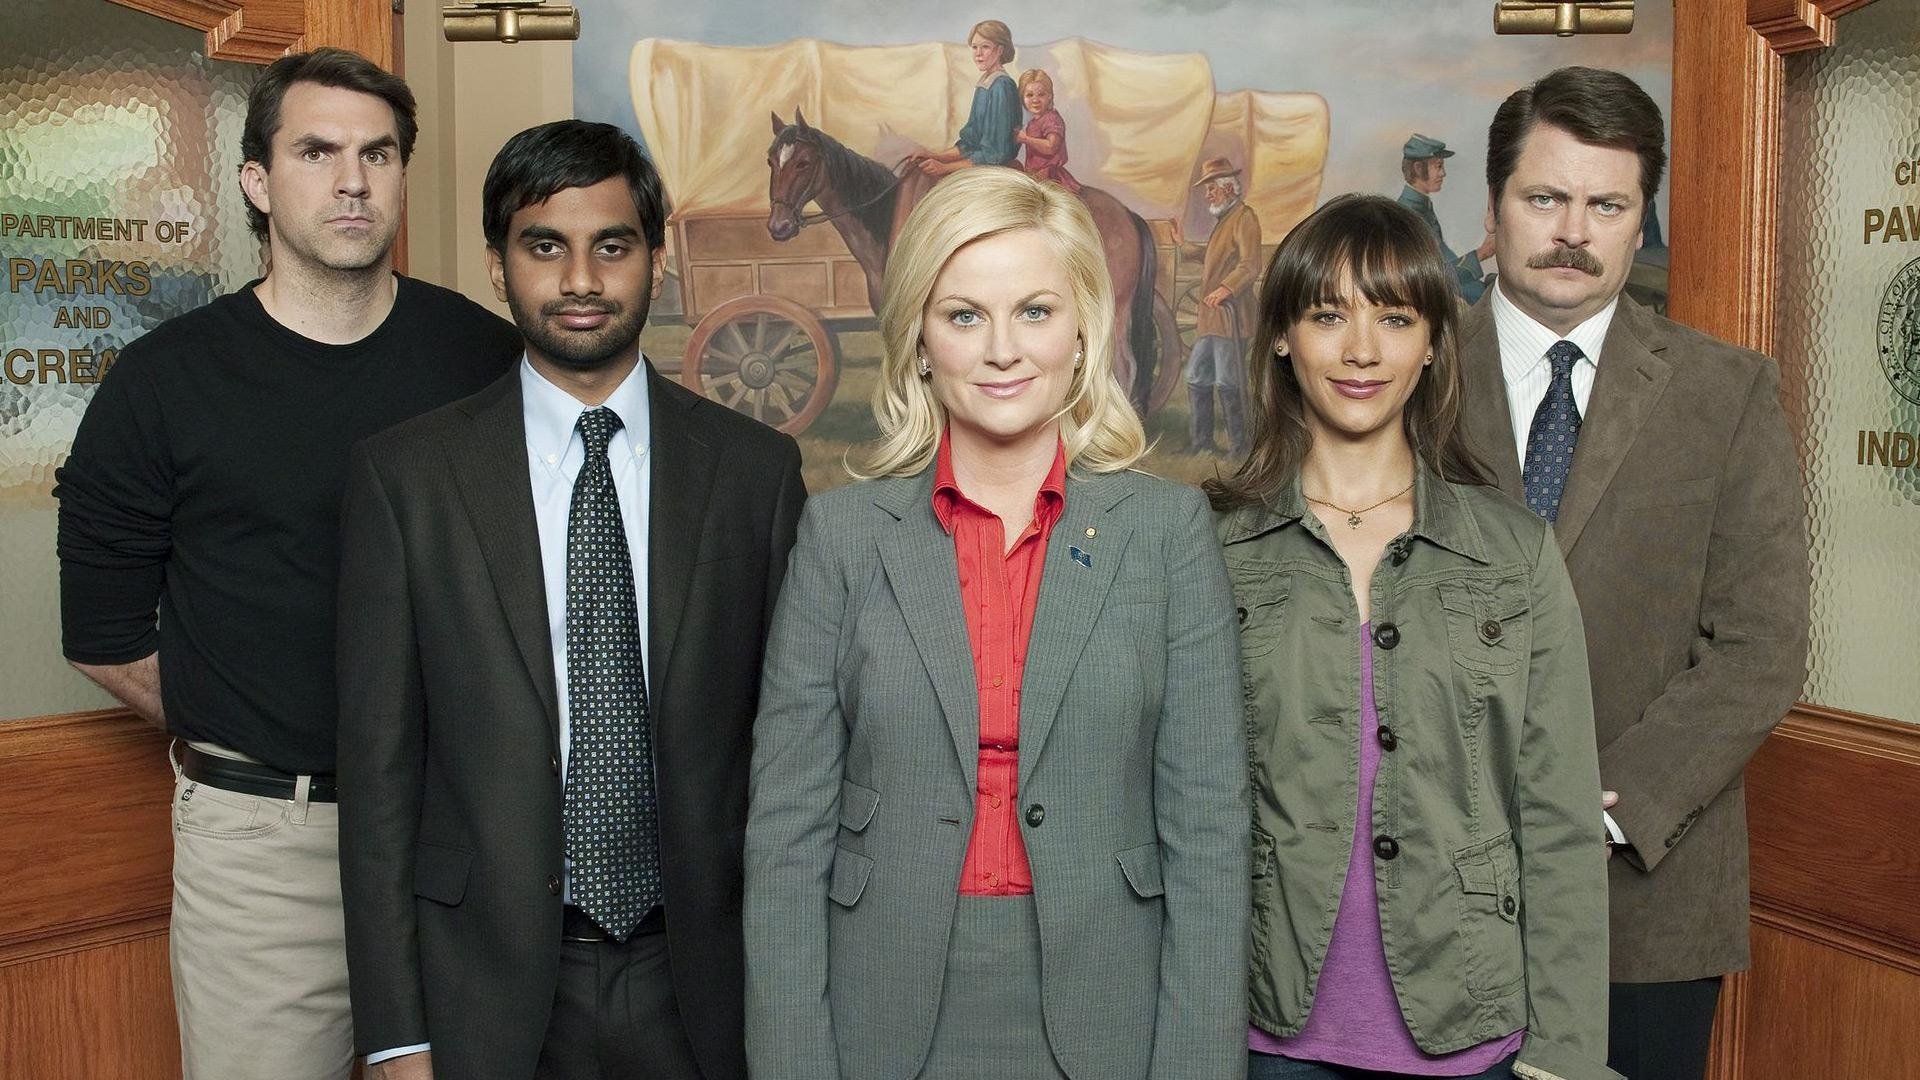 parks and rec wallpaper,event,suit,team,white collar worker,tourism